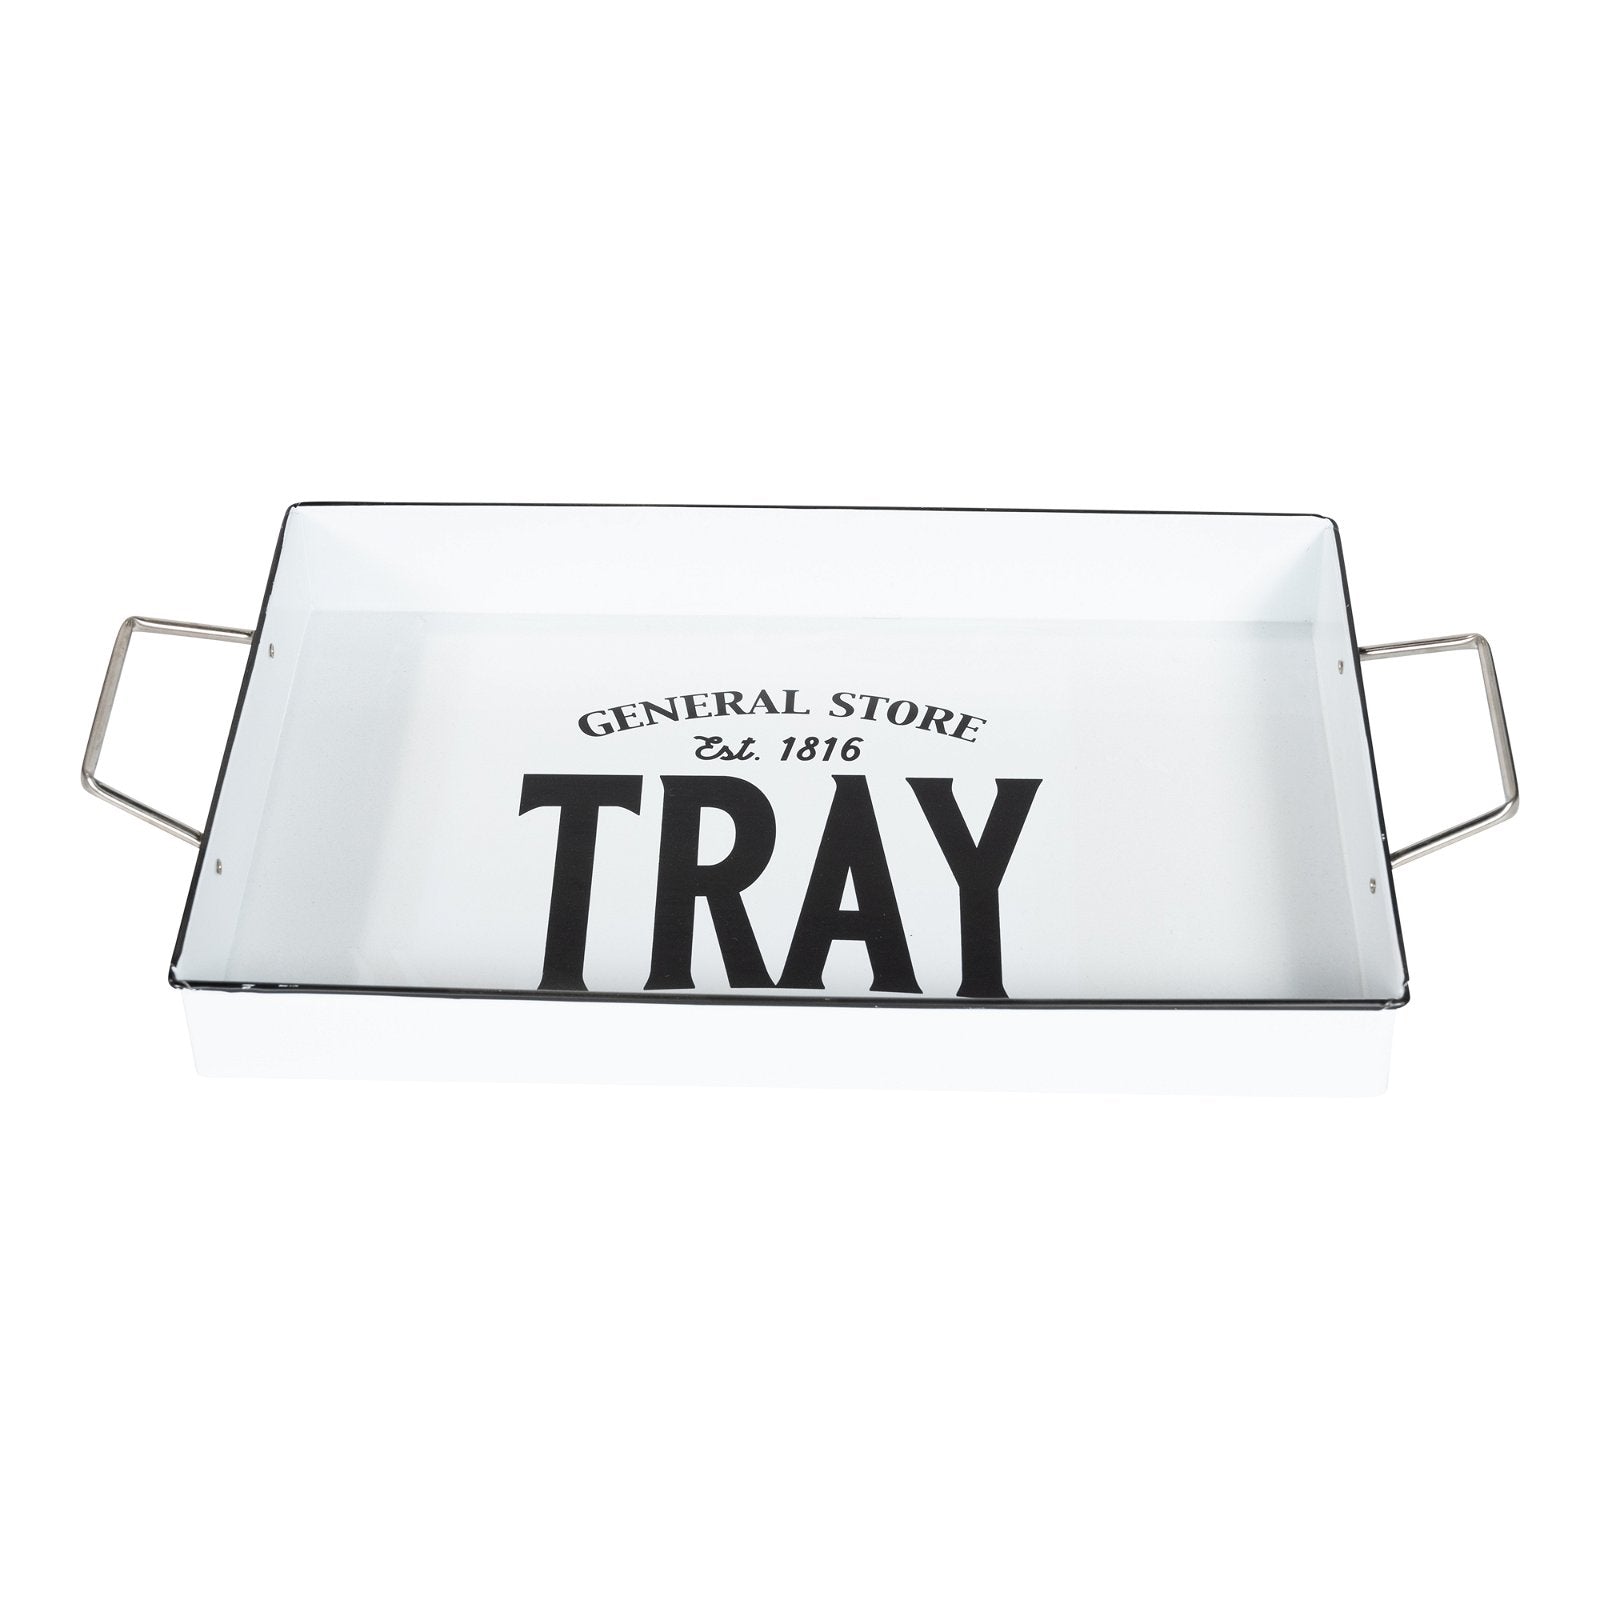 General Store Metal Serving Tray 51x27cm